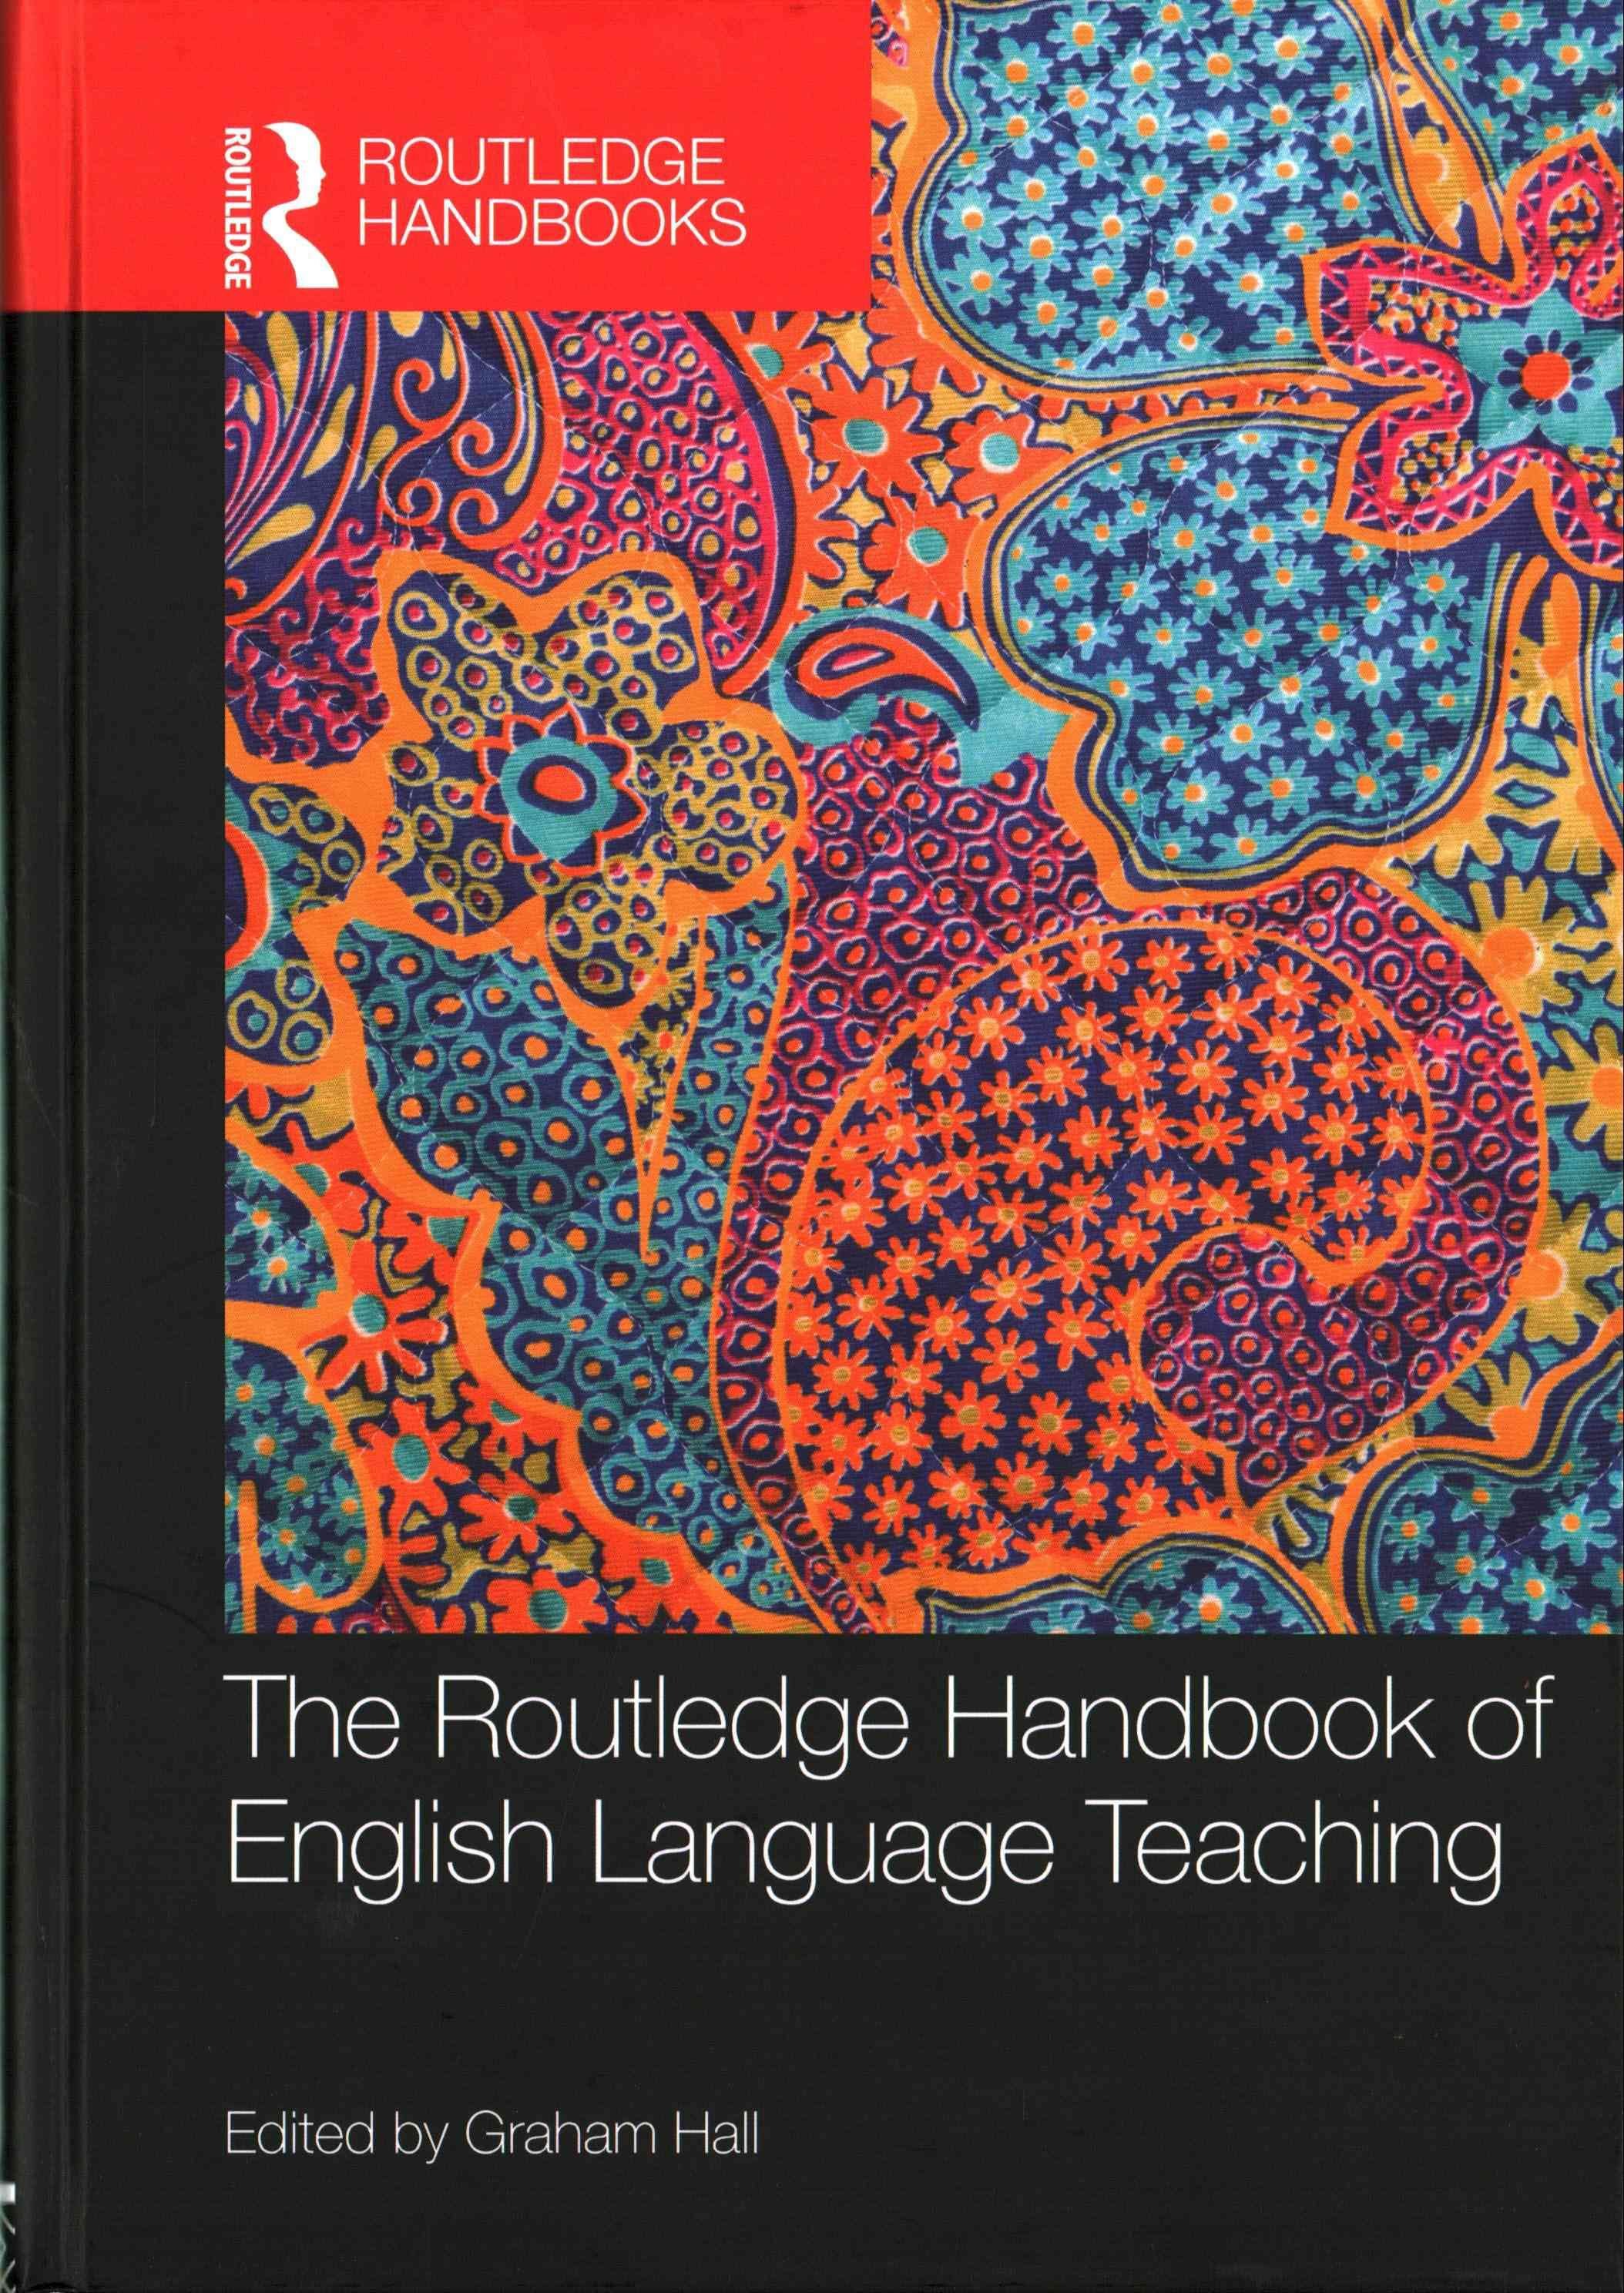 Graham　Hall　Teaching　Free　Delivery　Buy　Routledge　English　by　Handbook　With　of　Language